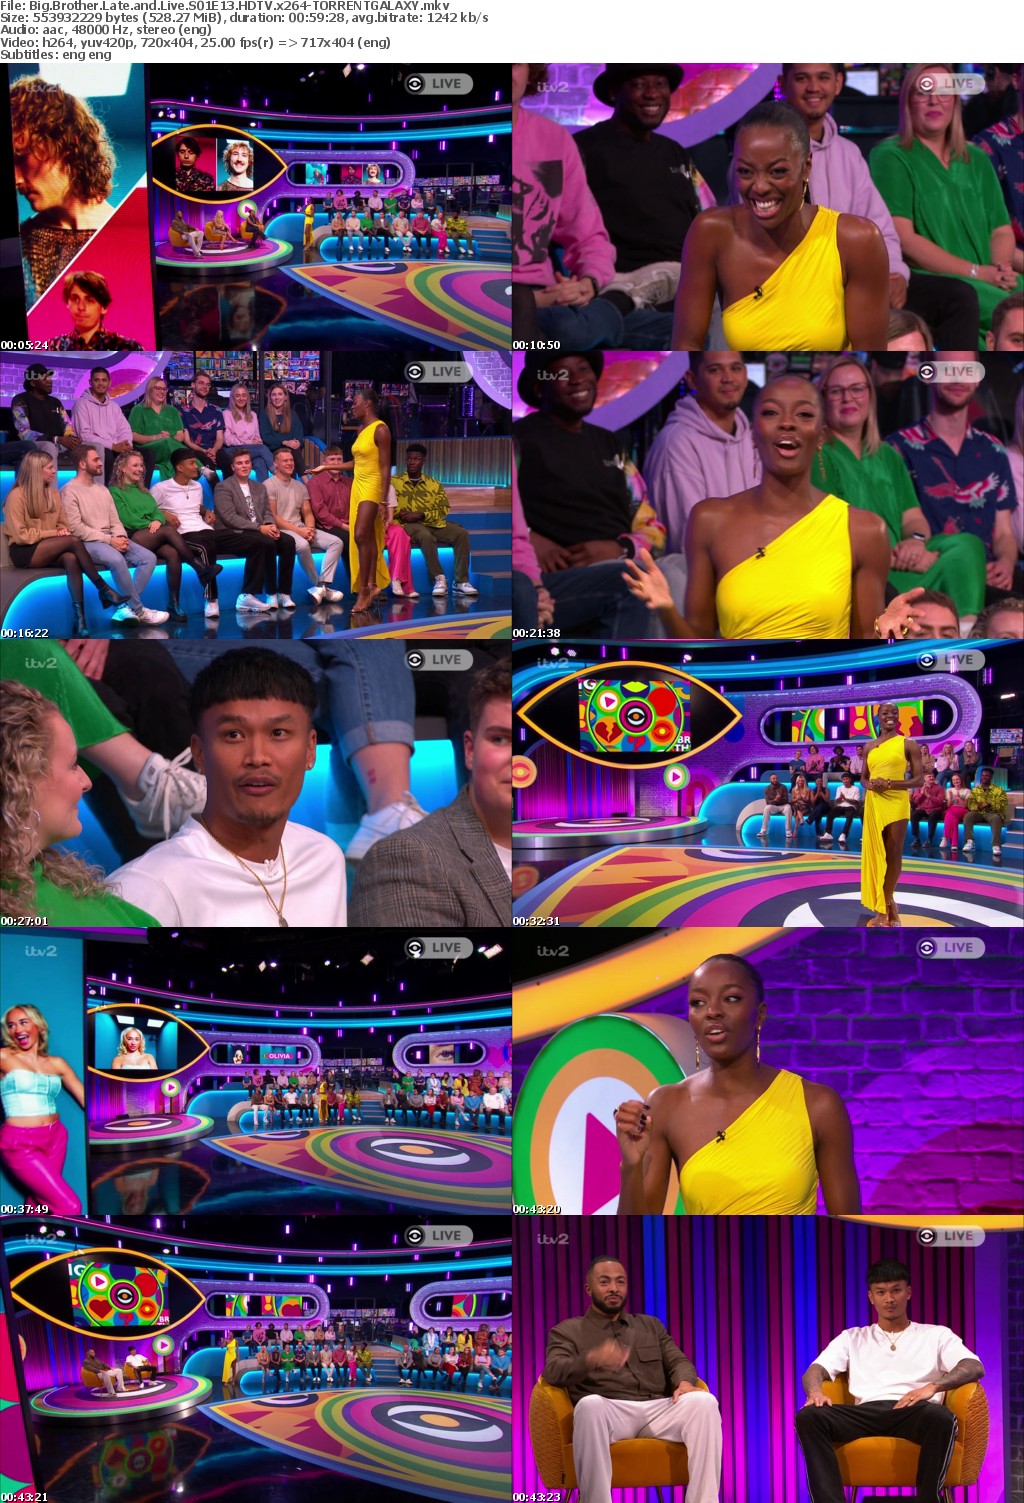 Big Brother Late and Live S01E13 HDTV x264-GALAXY